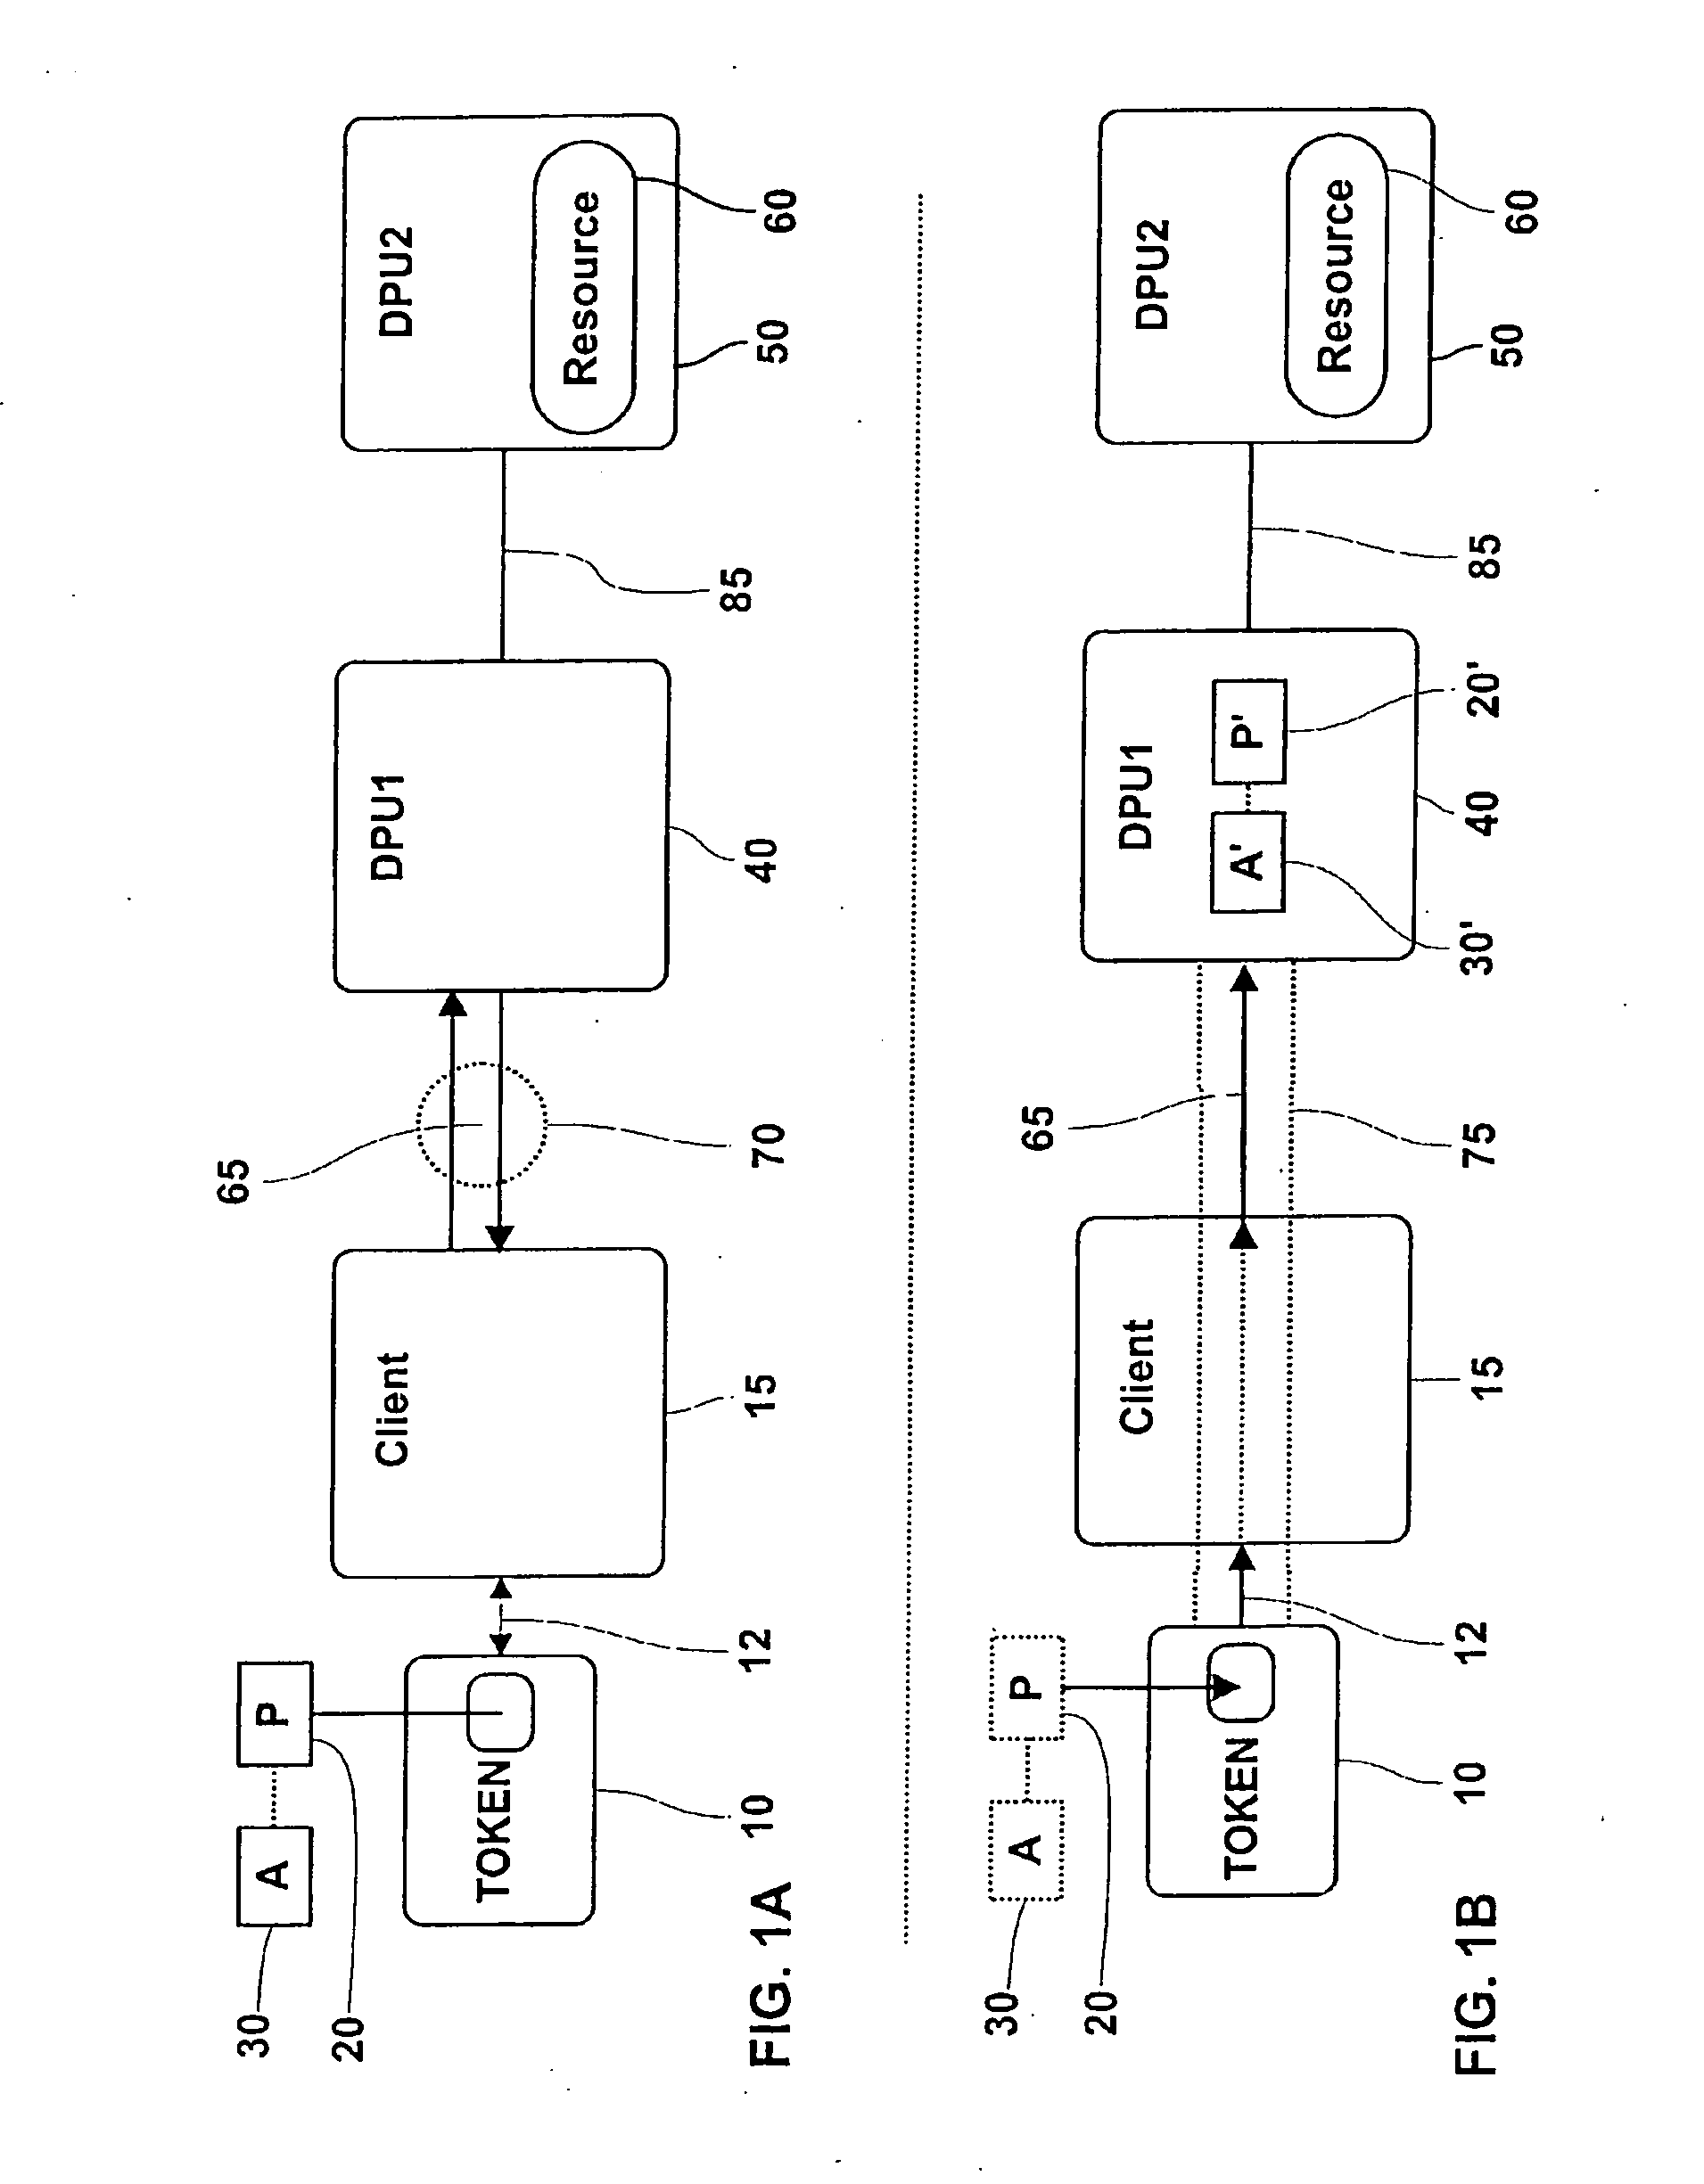 System and method for privilege delegation and control